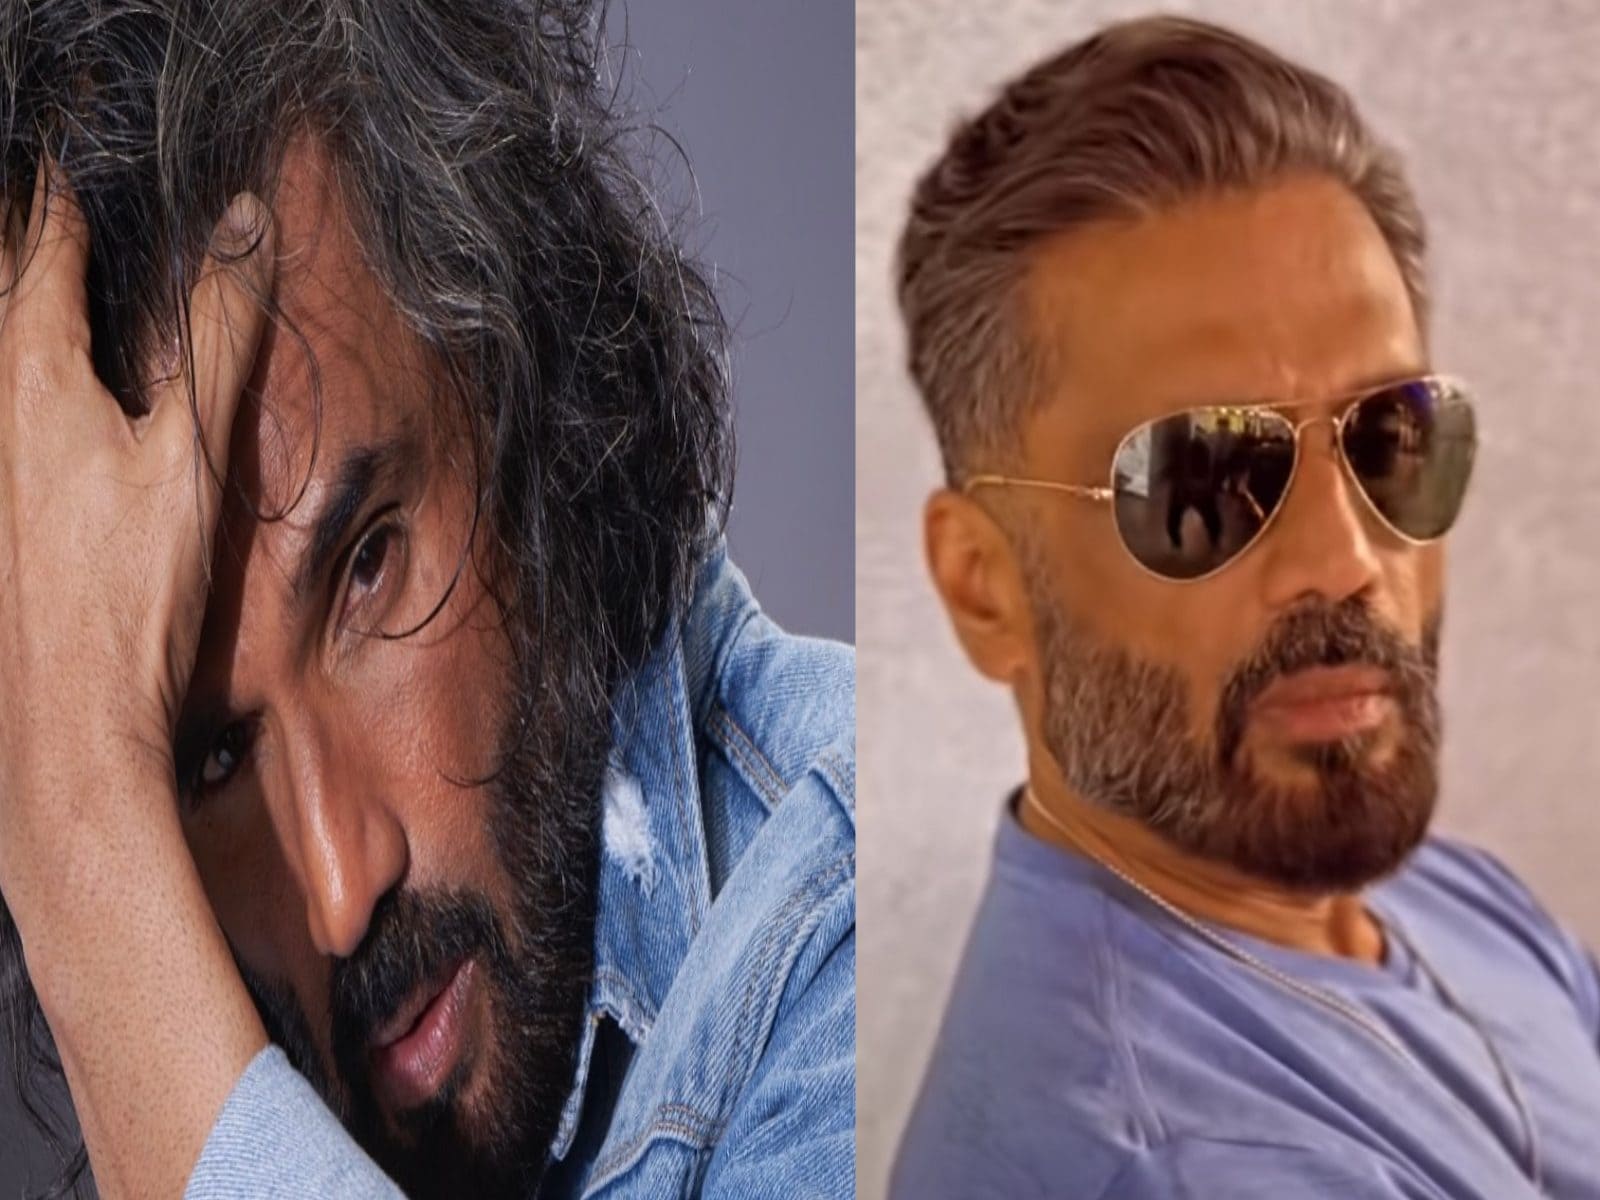 Download Sunil Shetty Beard Look for desktop or mobile device. Make your  device cooler and more beautiful. | Hair and beard styles, Beard styles,  Beard look